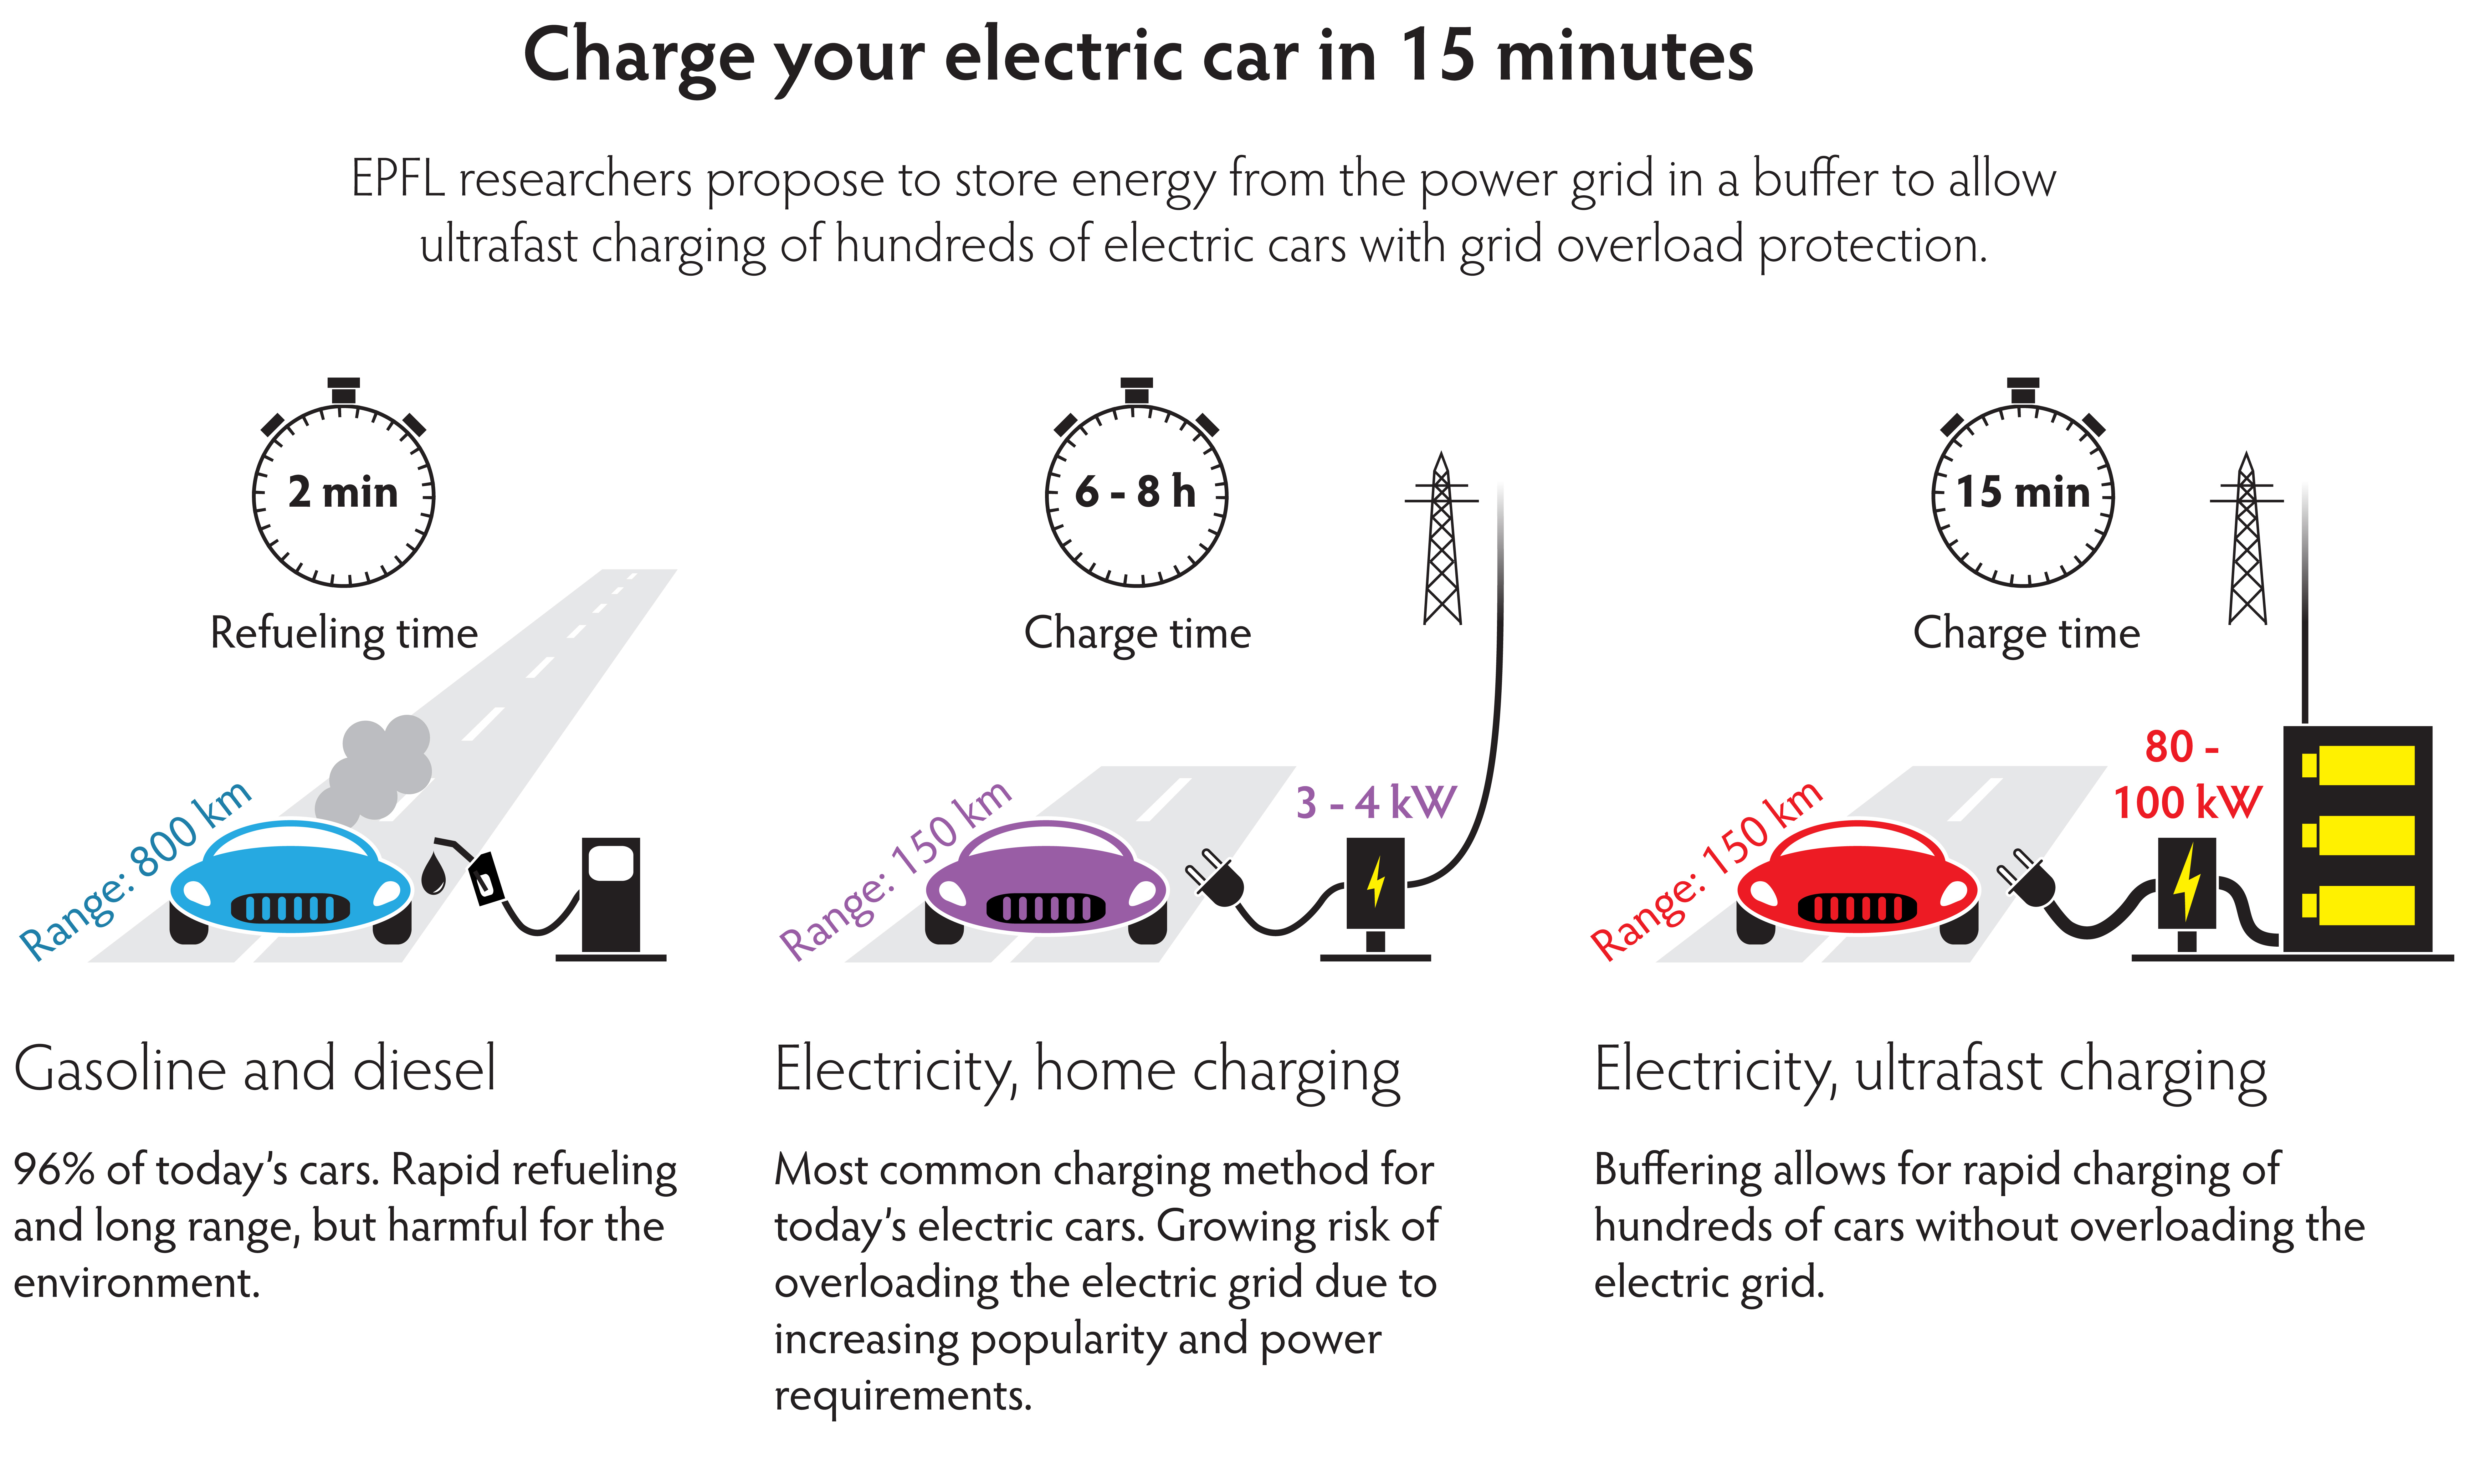 Charging an electric car as fast as filling a tank of gas